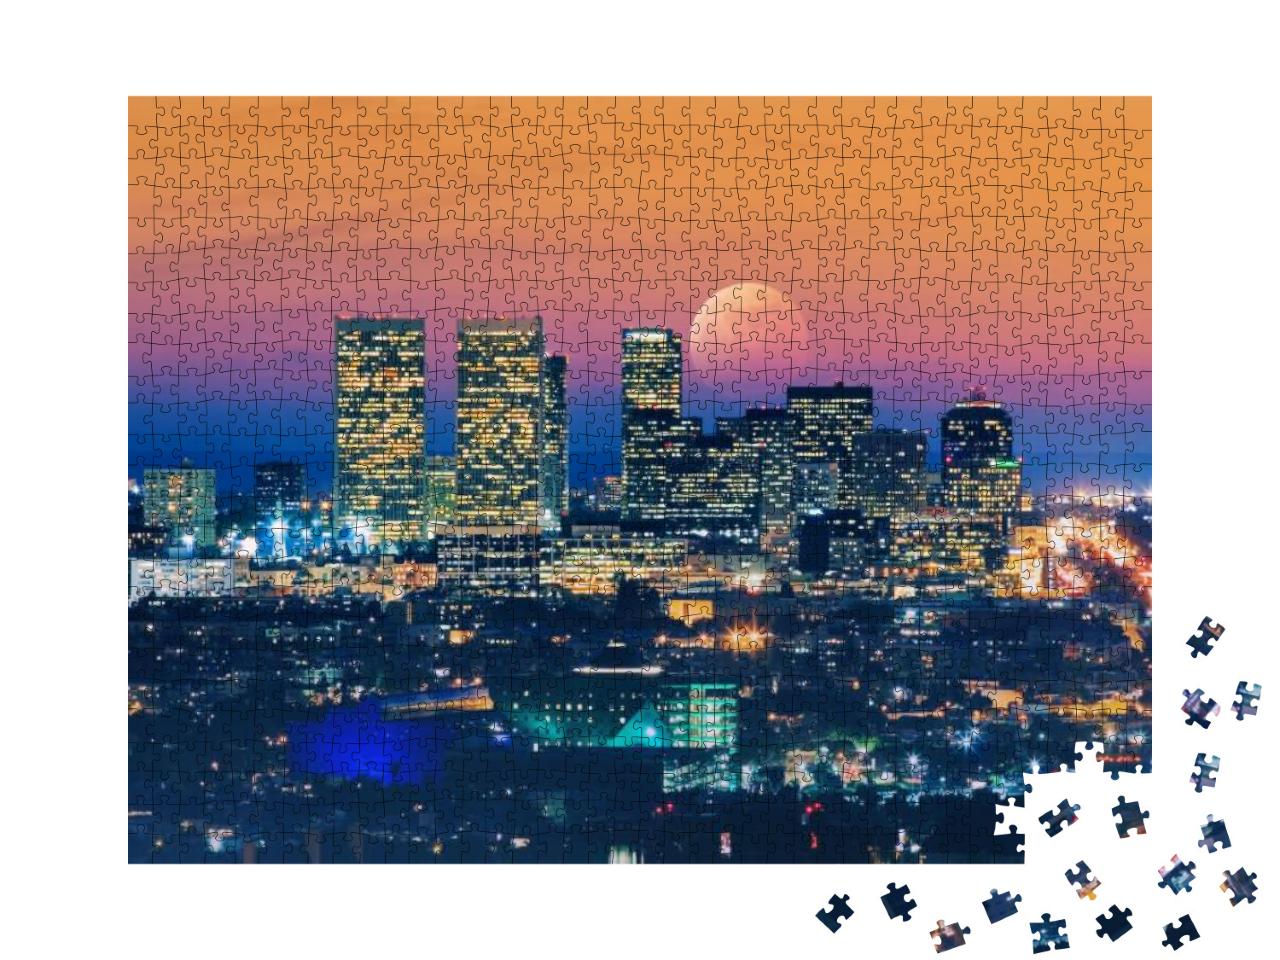 Ful Moon Rising Over Los Angeles Skyline At Dusk. View of... Jigsaw Puzzle with 1000 pieces